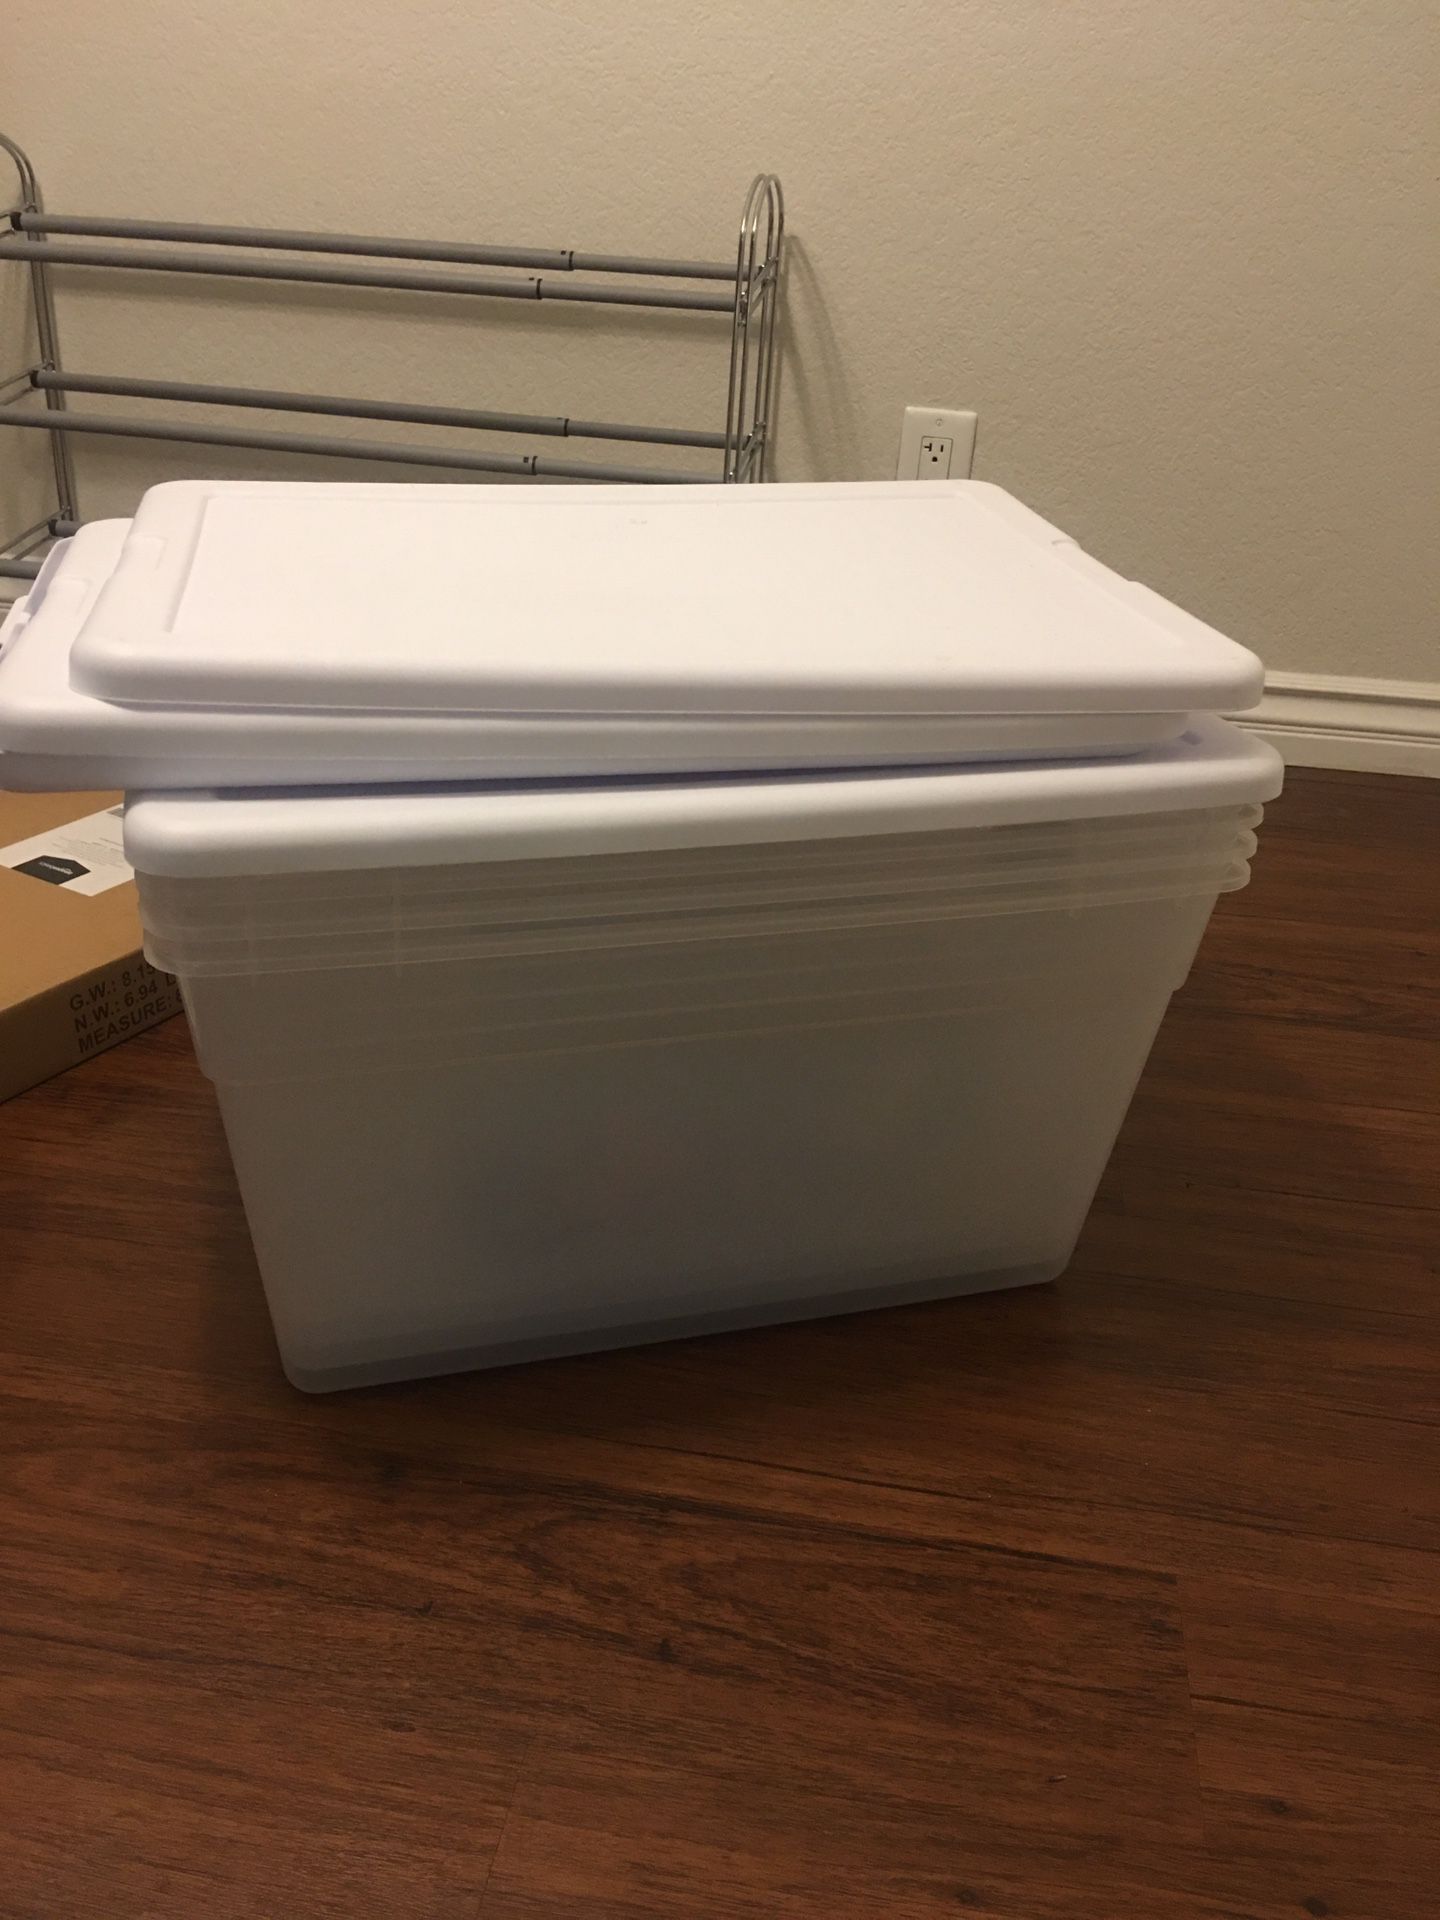 4 storage containers with lids